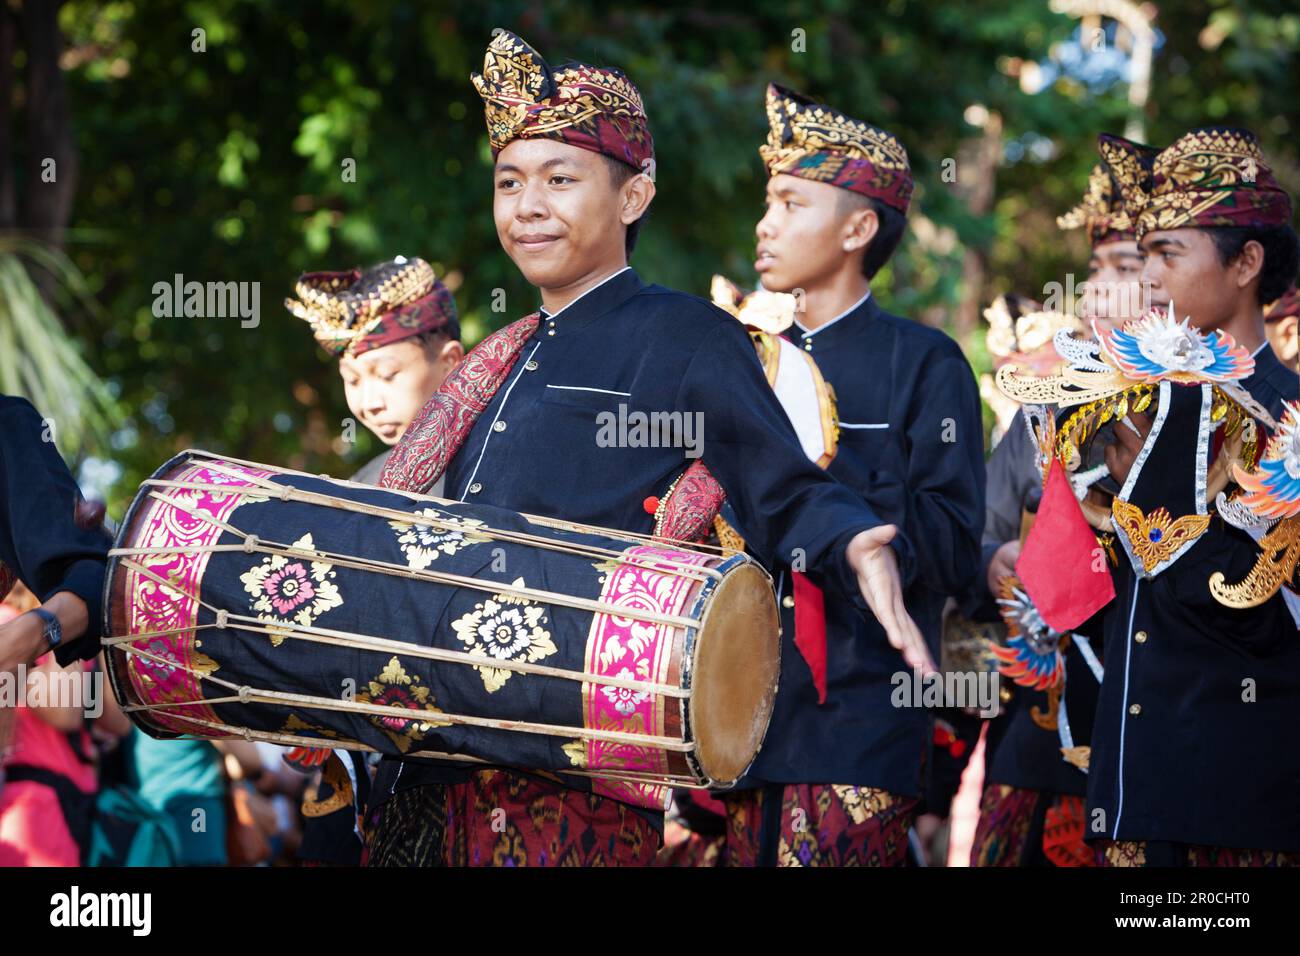 Denpasar, Bali island, Indonesia - June 11, 2016: Young musicians dressed in ethnic Balinese people costumes play traditional orchestra music Stock Photo